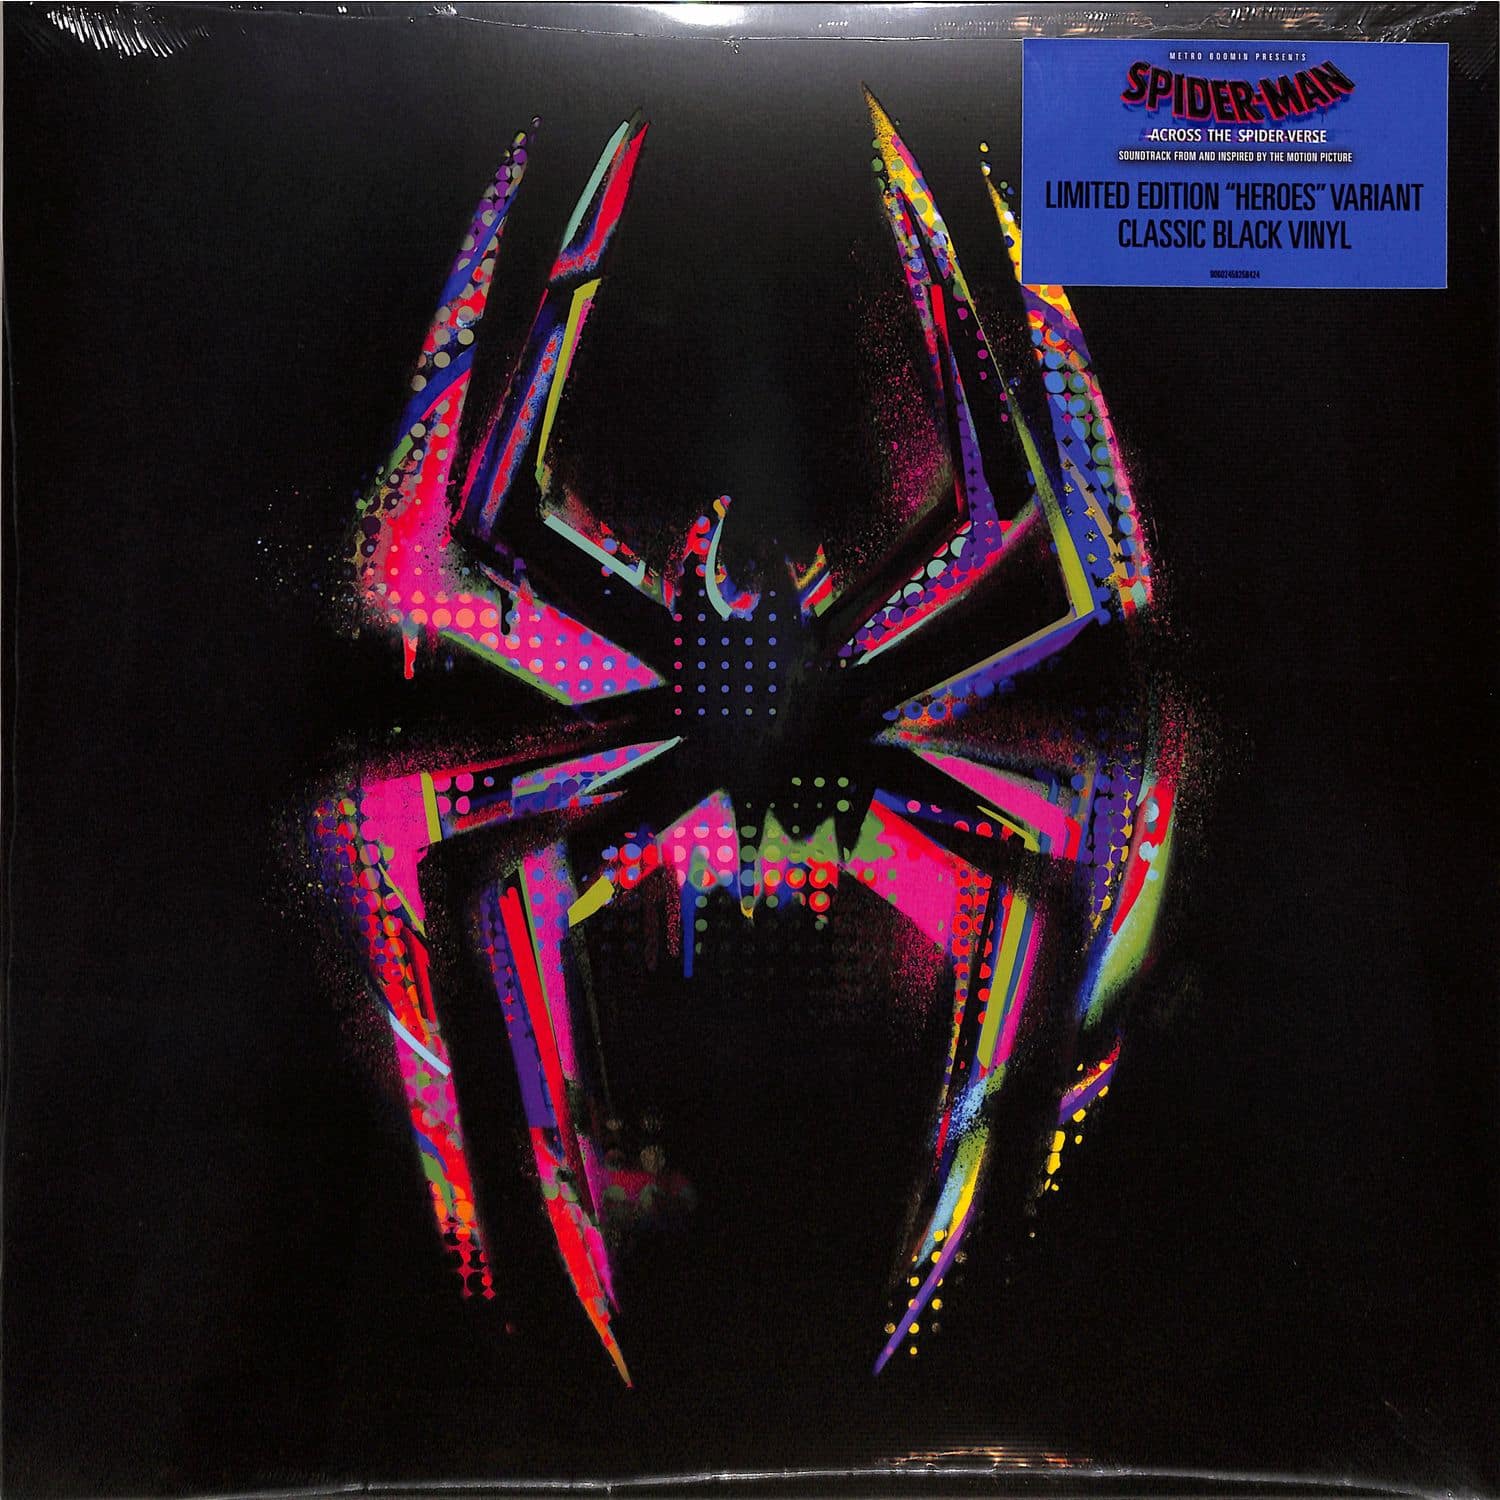 OST / Metro Boomin - PRES. SPIDER-MAN: ACROSS THE SPIDER-VERSE 